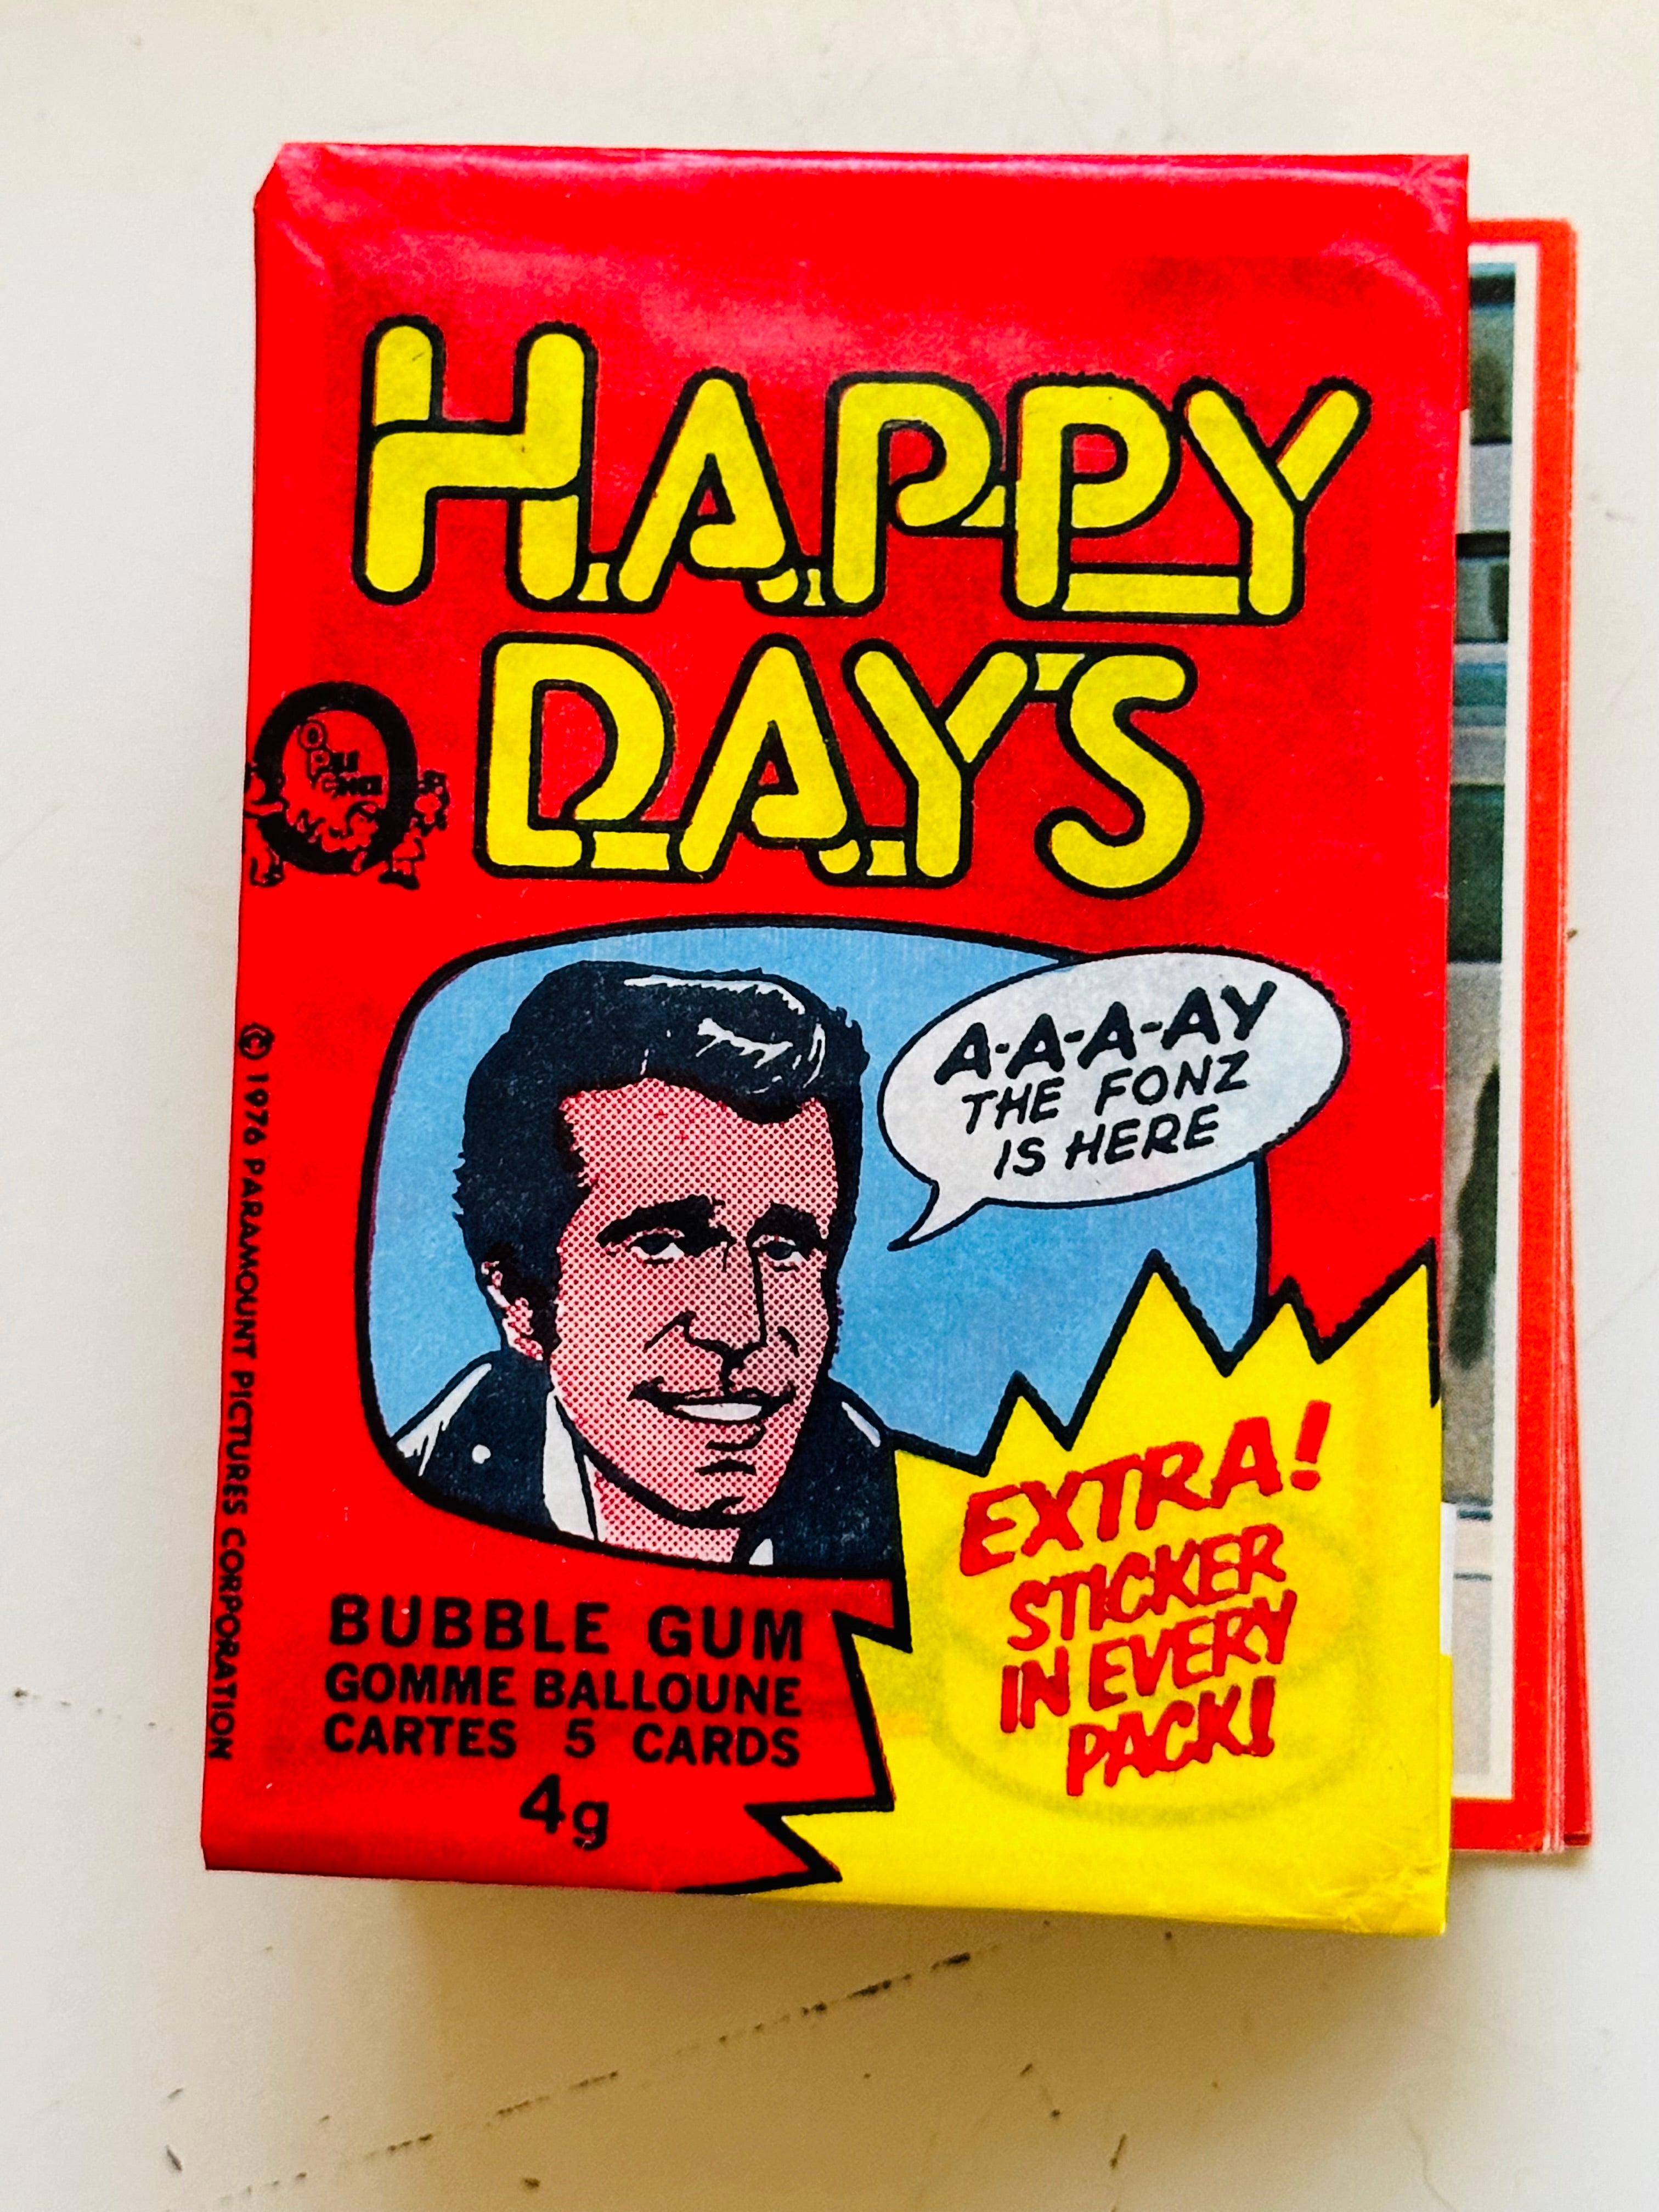 Happy Days Opc Canadian version series 2 cards set with wrapper 1976